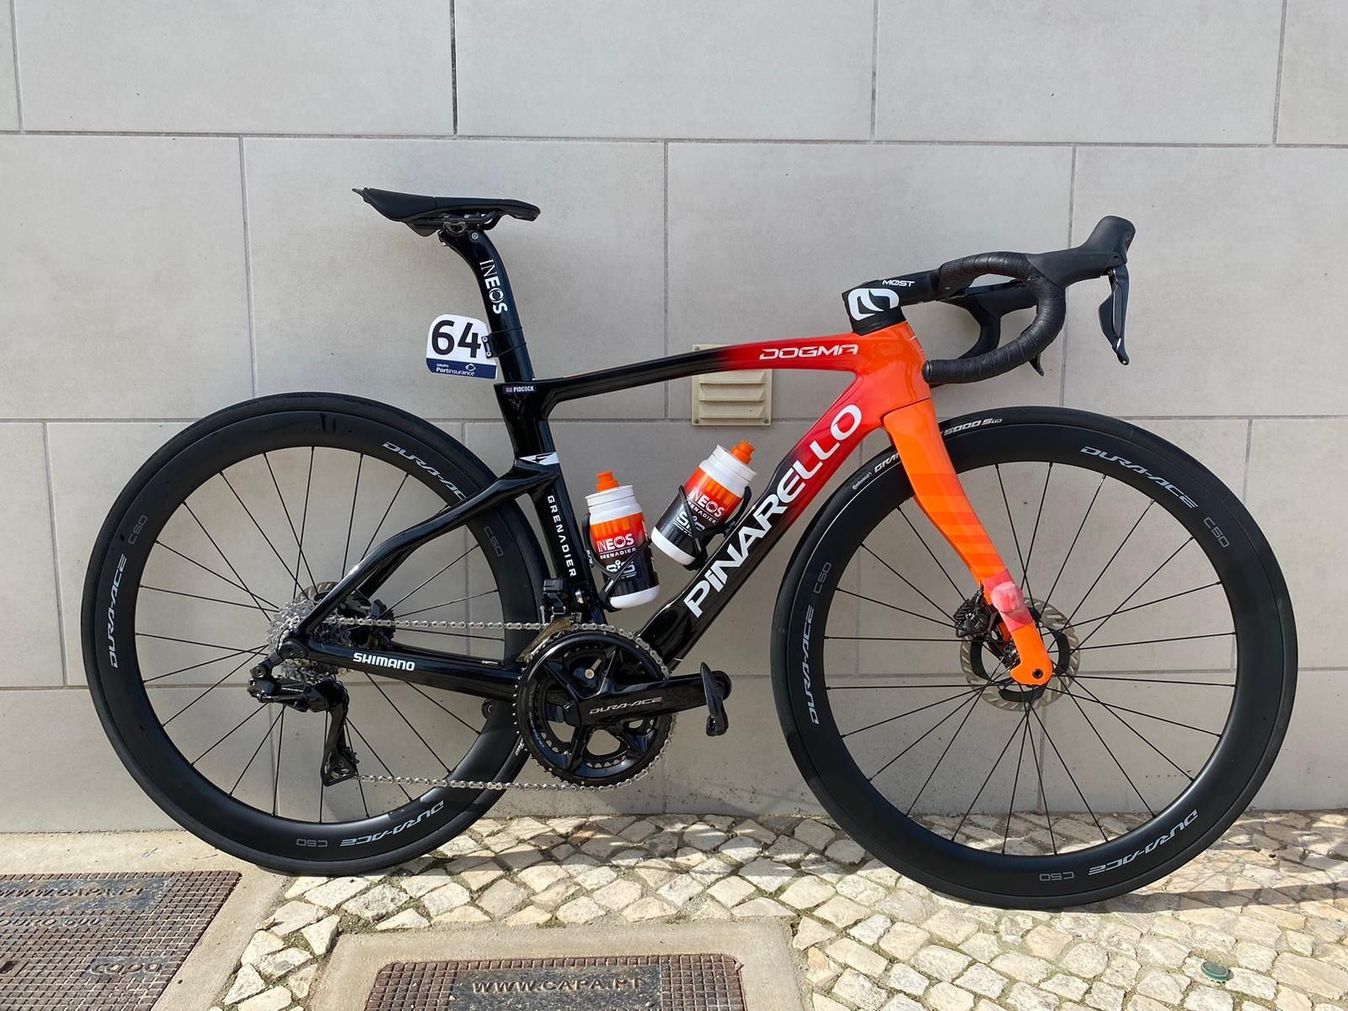 Different colourway but a very familiar Pinarello Dogma for Ineos Grenadiers in 2024